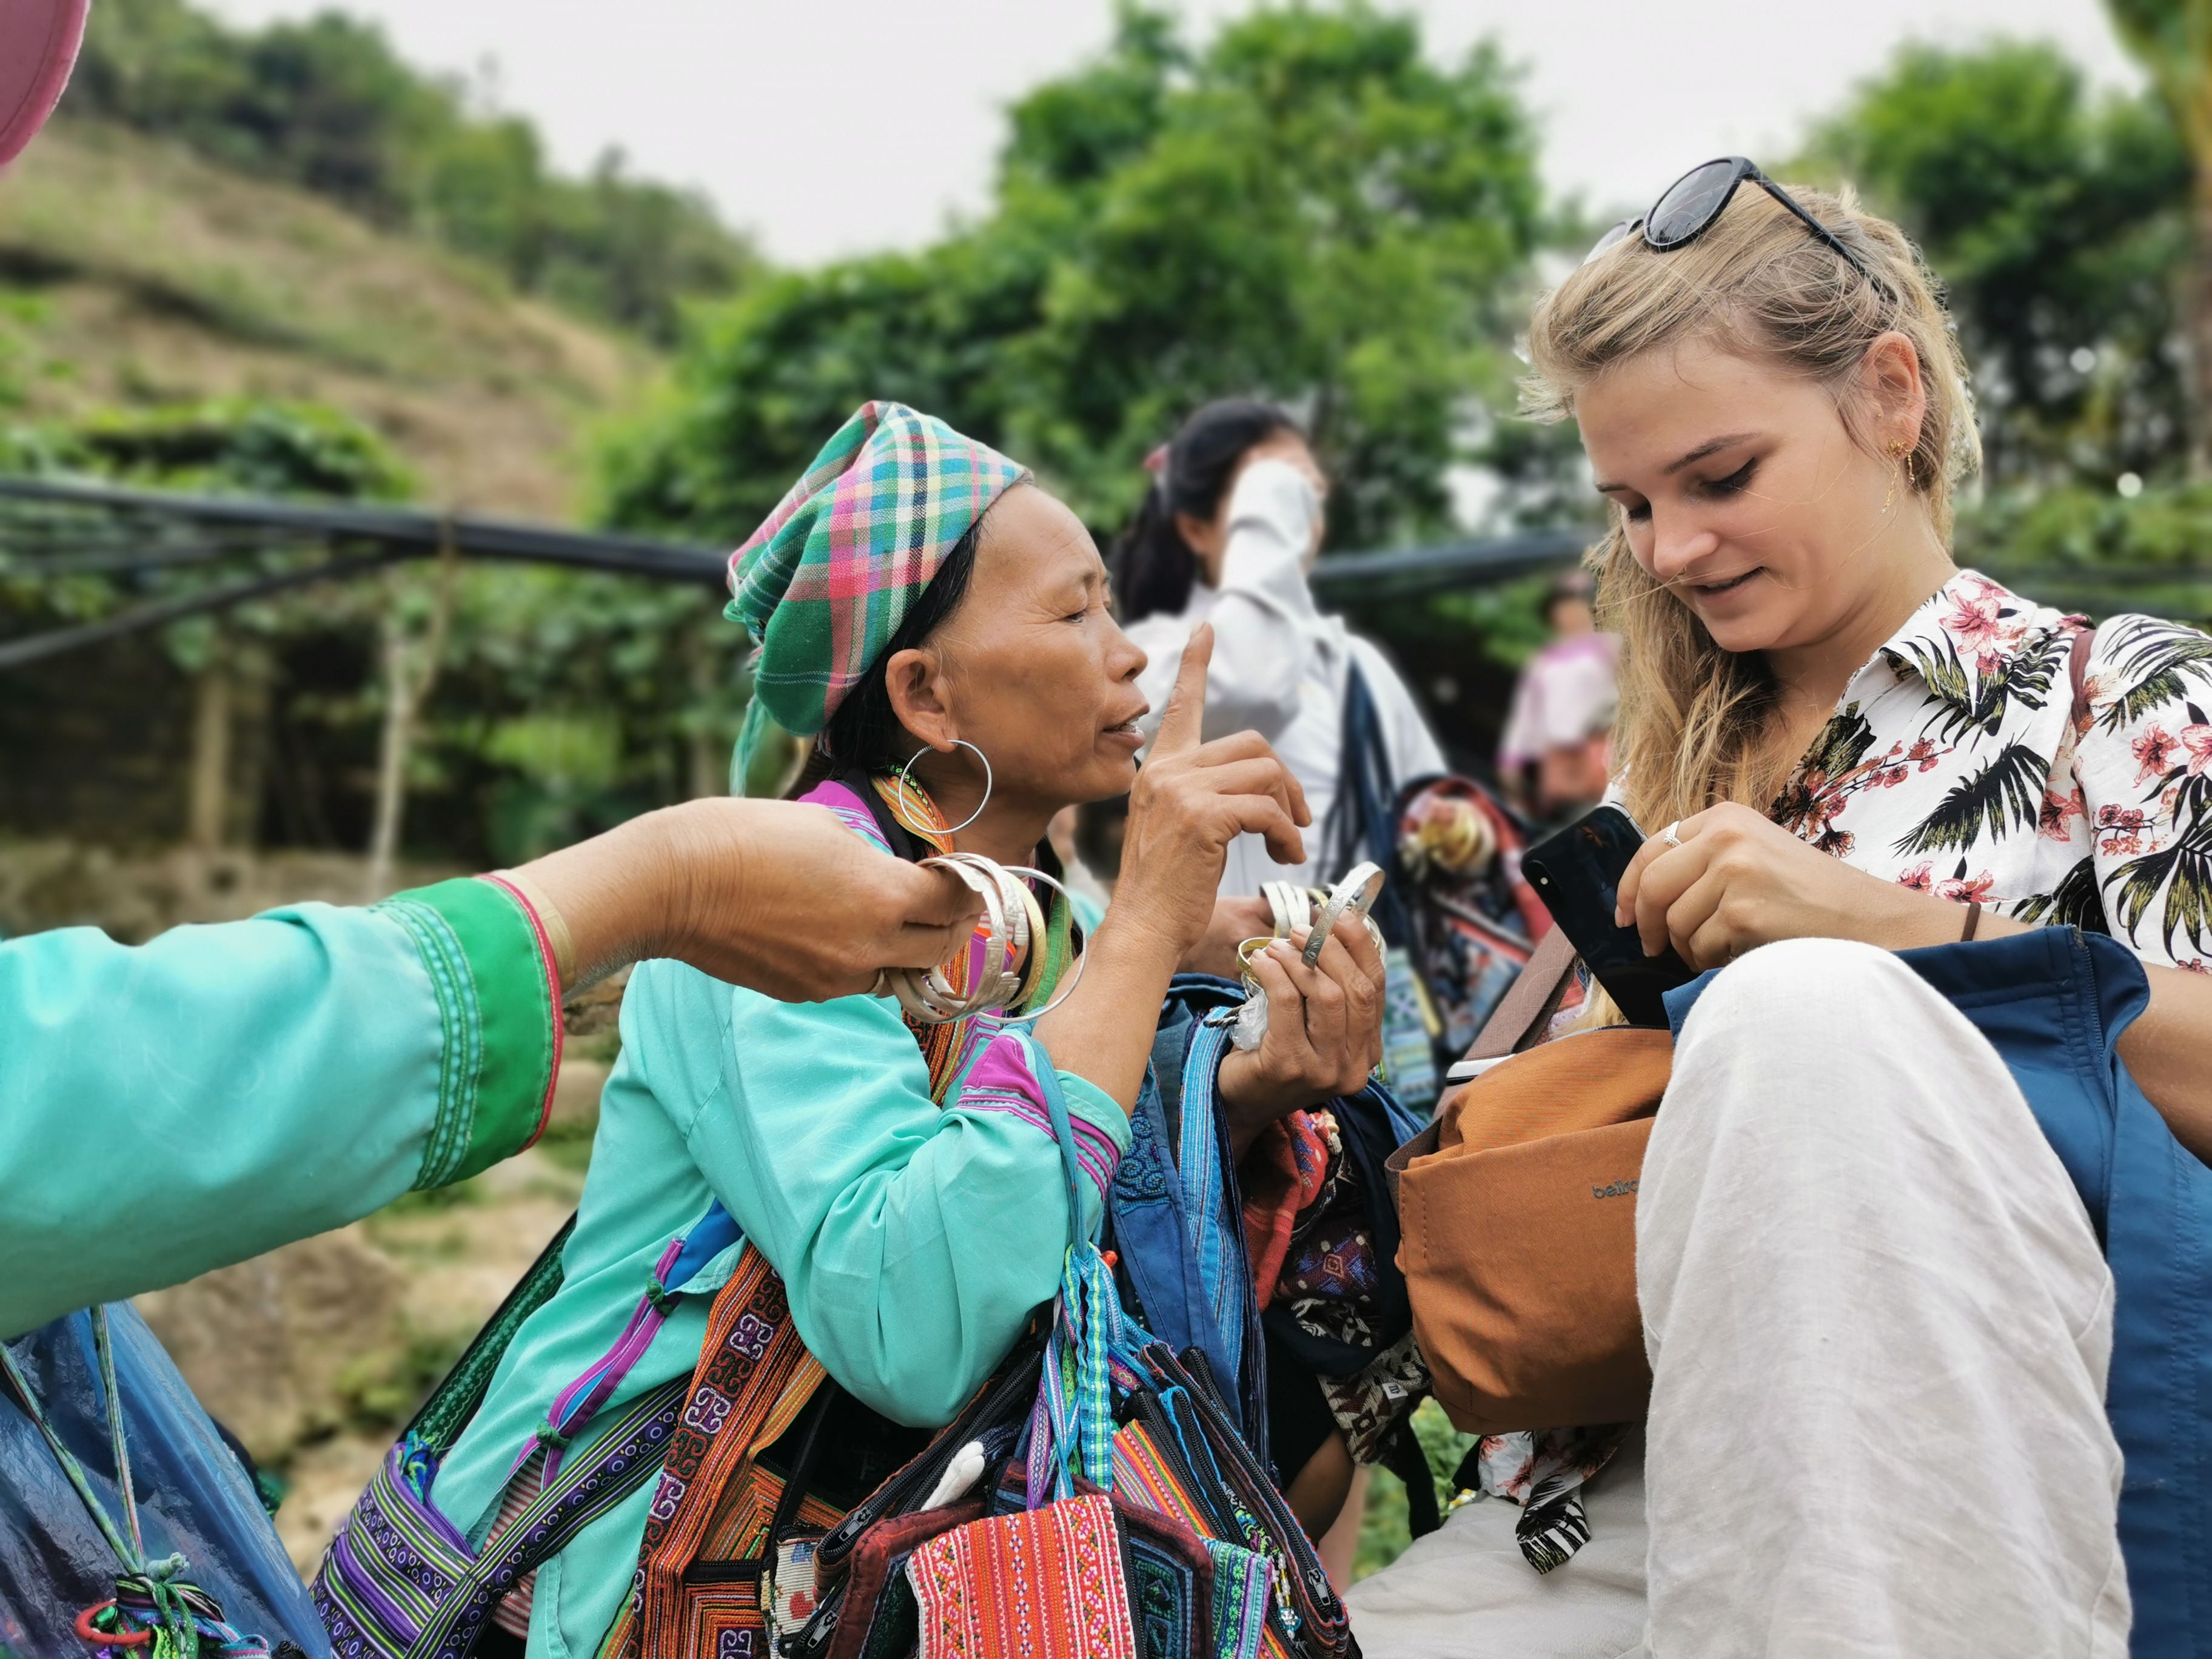 Tourist Haggling For Traditional Wares In Sapa, Vietnam